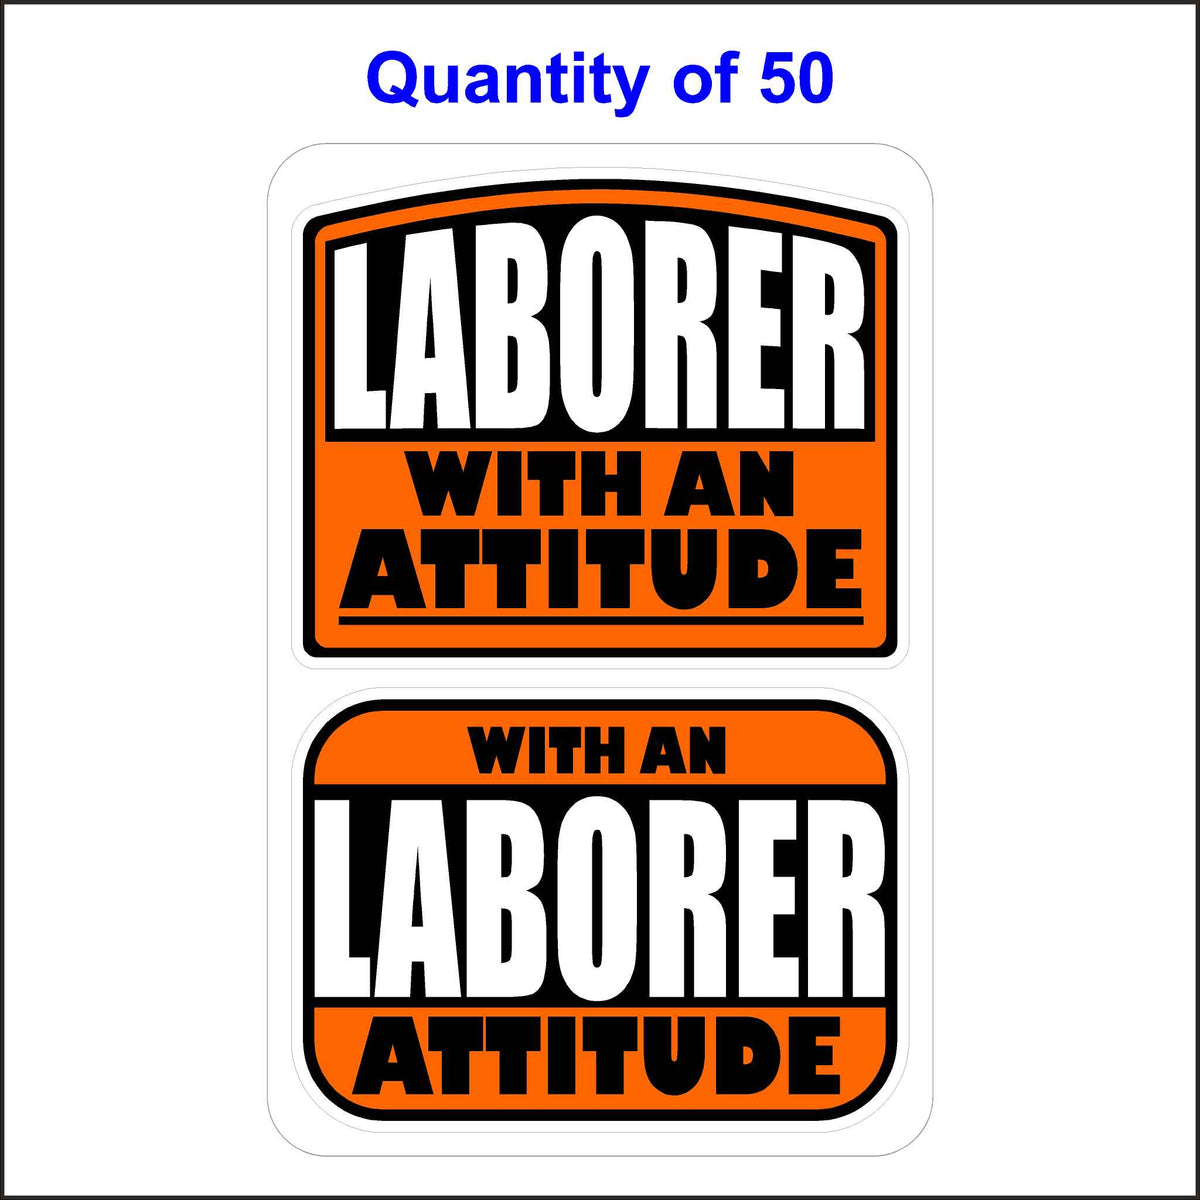 Laborer With An Attitude Stickers 50 Quantity.